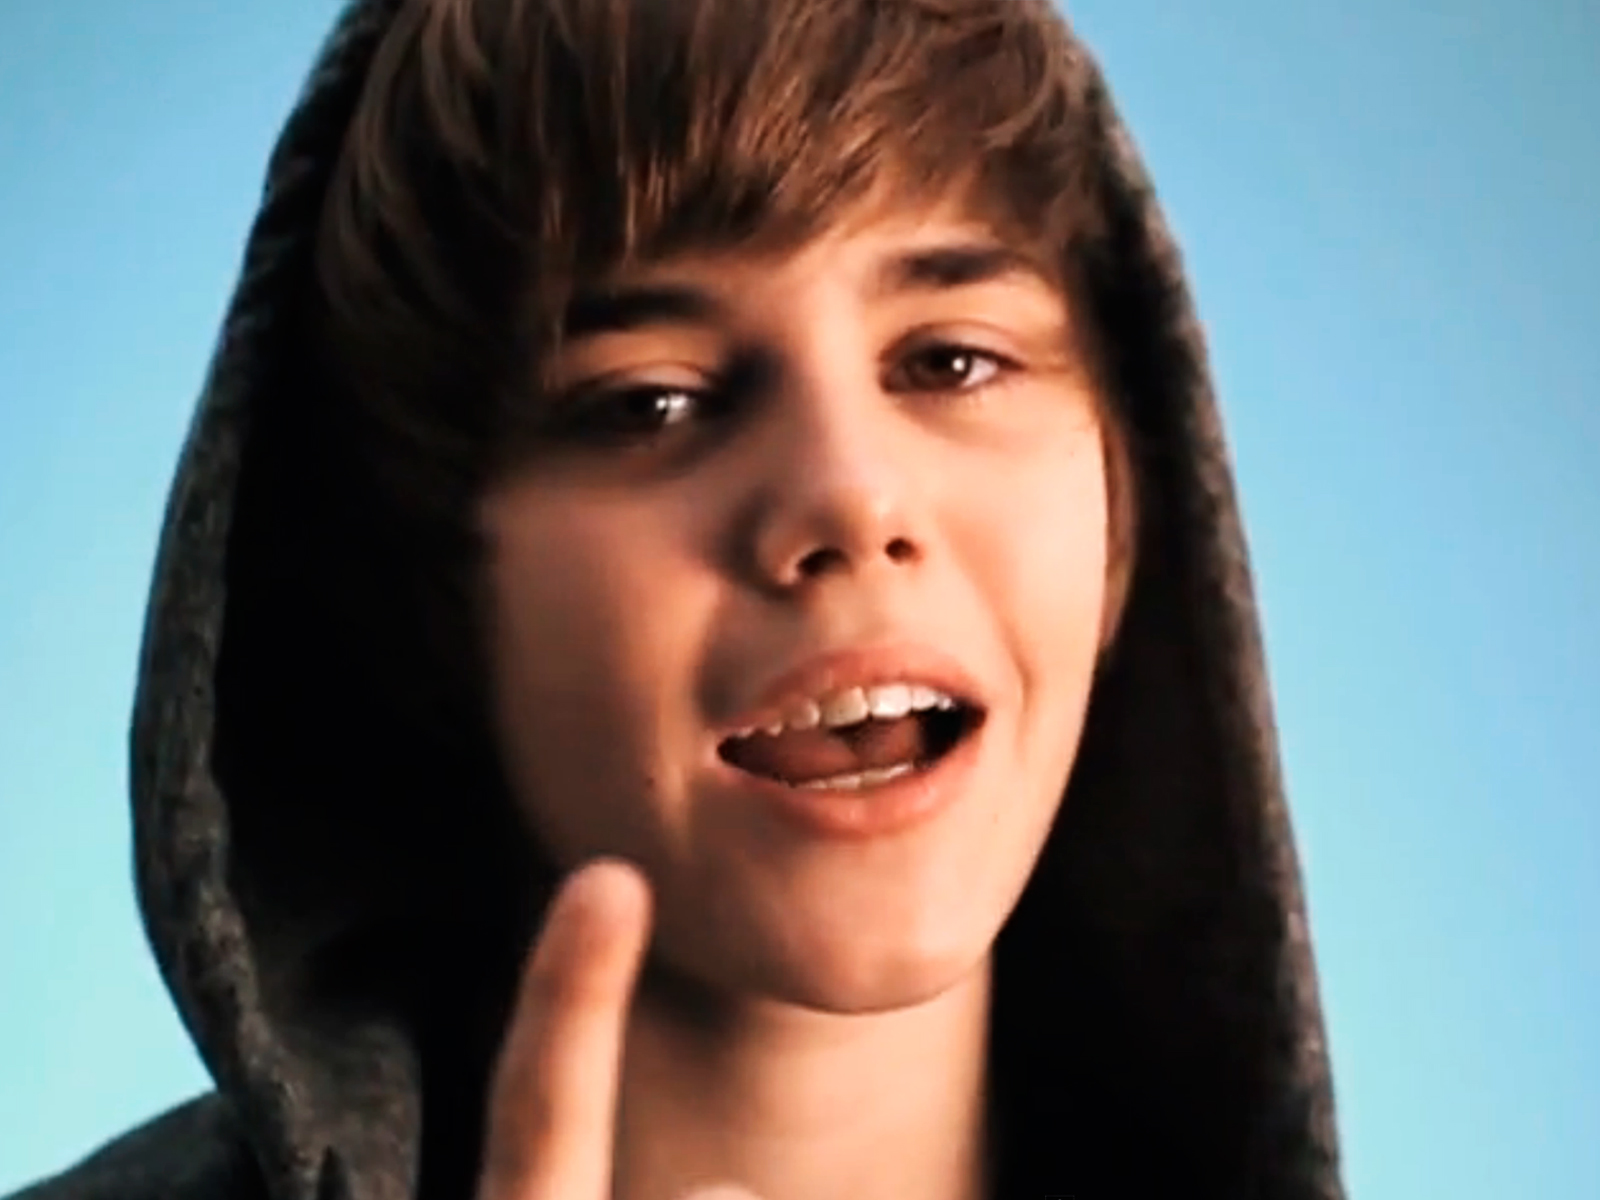 Justin Bieber - One Time - Watch YouTube Music1600 x 1200